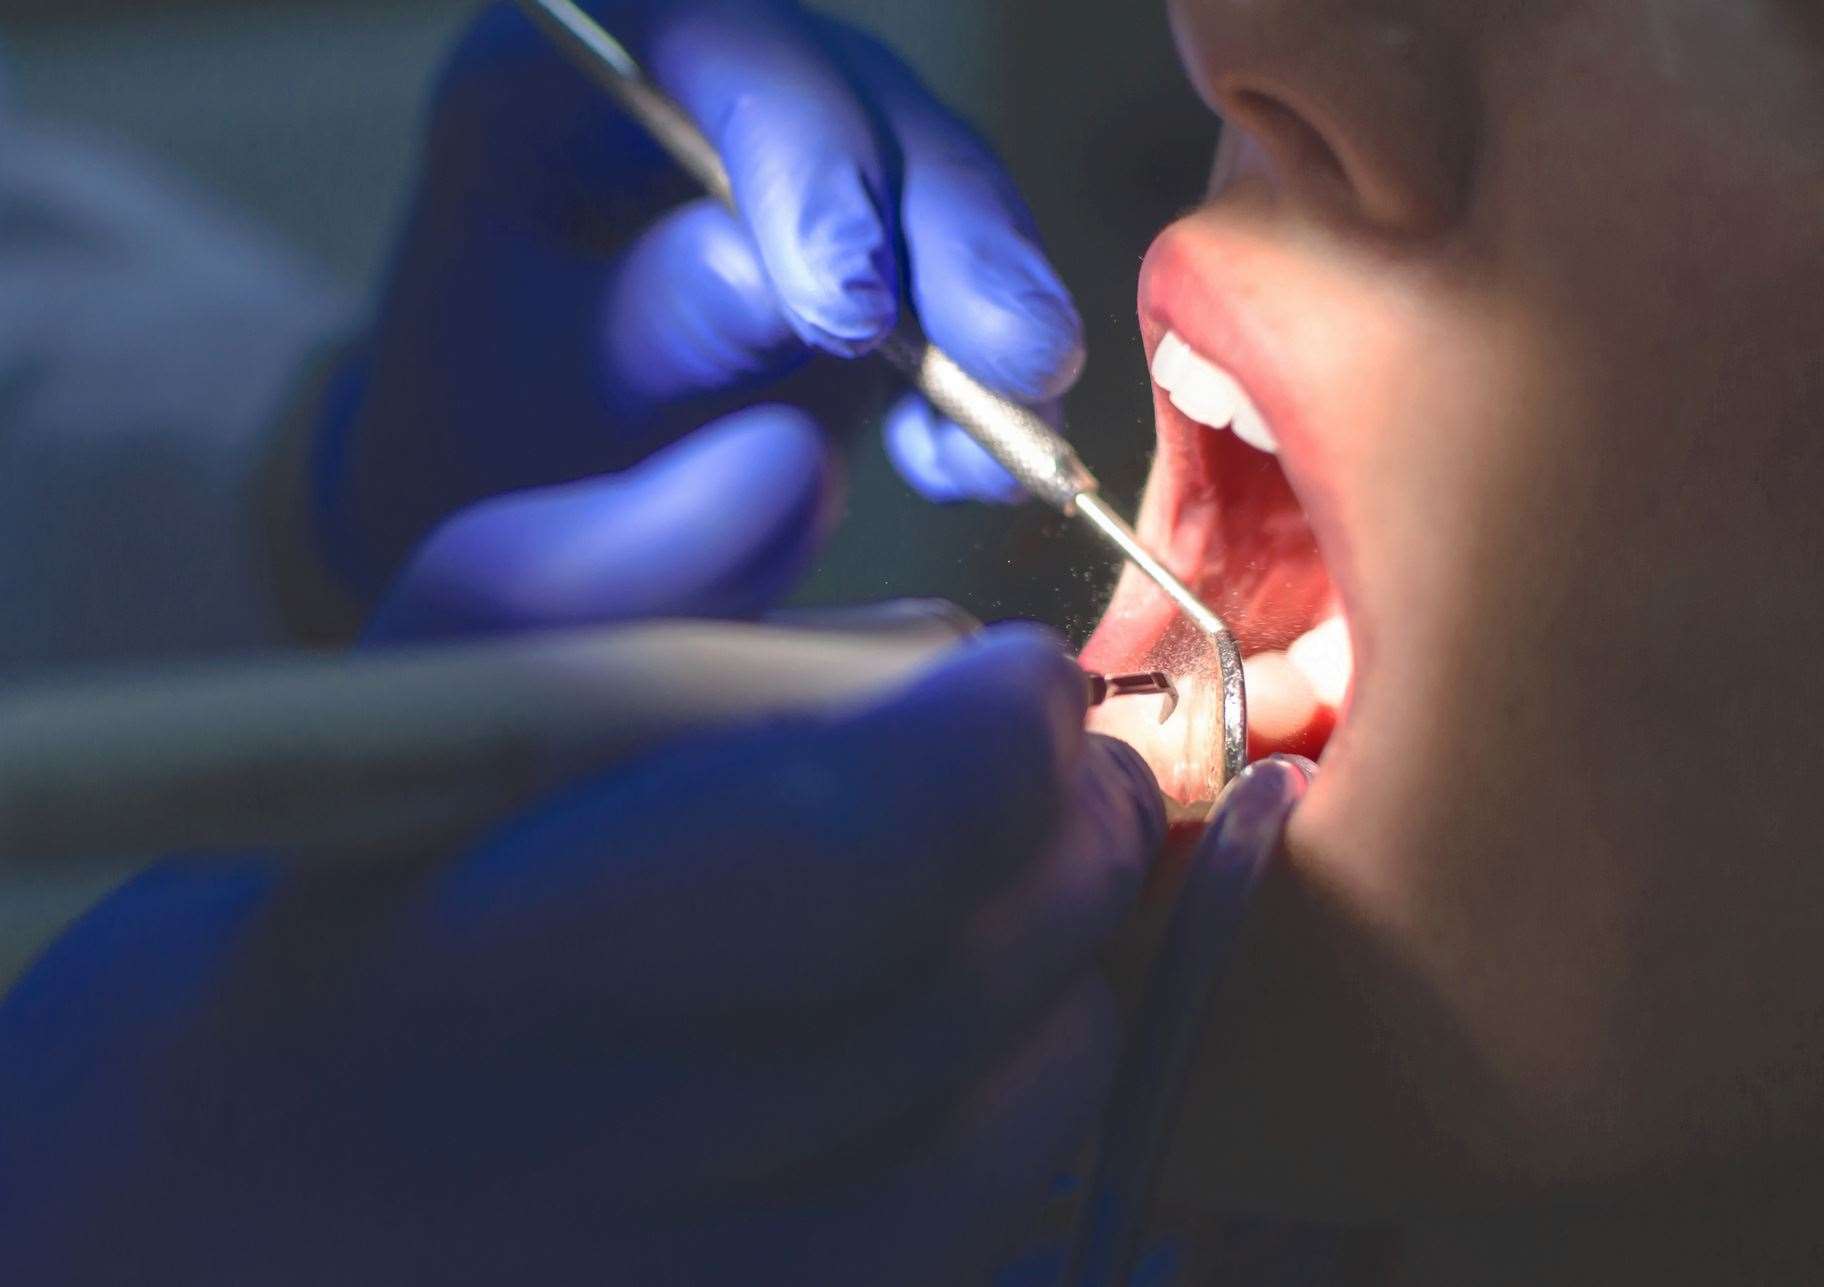 You’ll pay more to see an NHS dentist from April. Image: iStock.